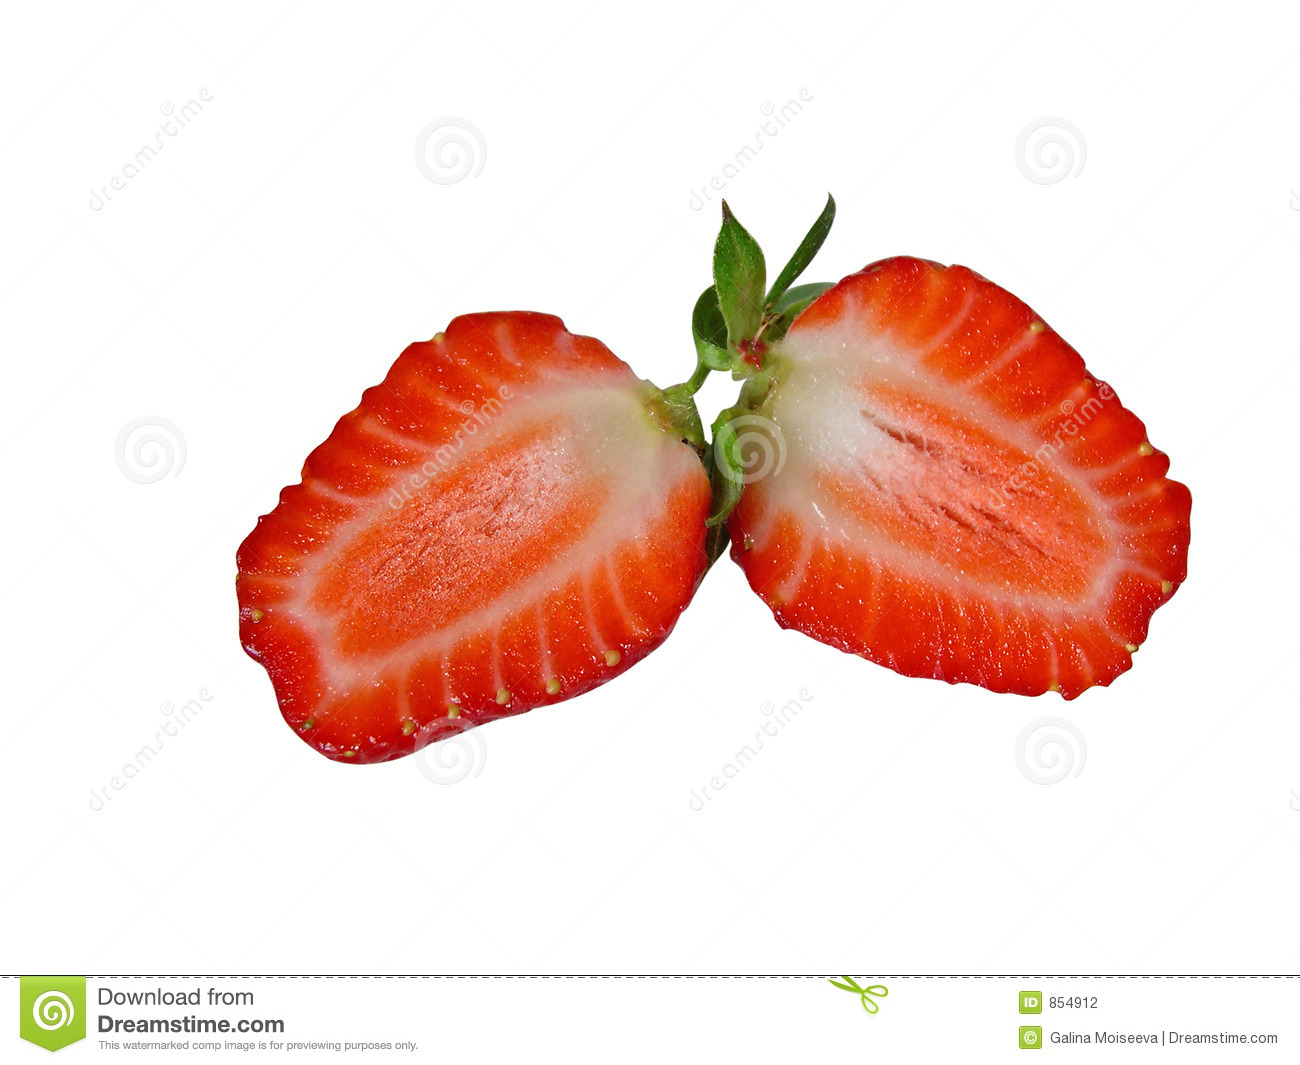 The Strawberry Cut Half And Half Stock Photography   Image  854912